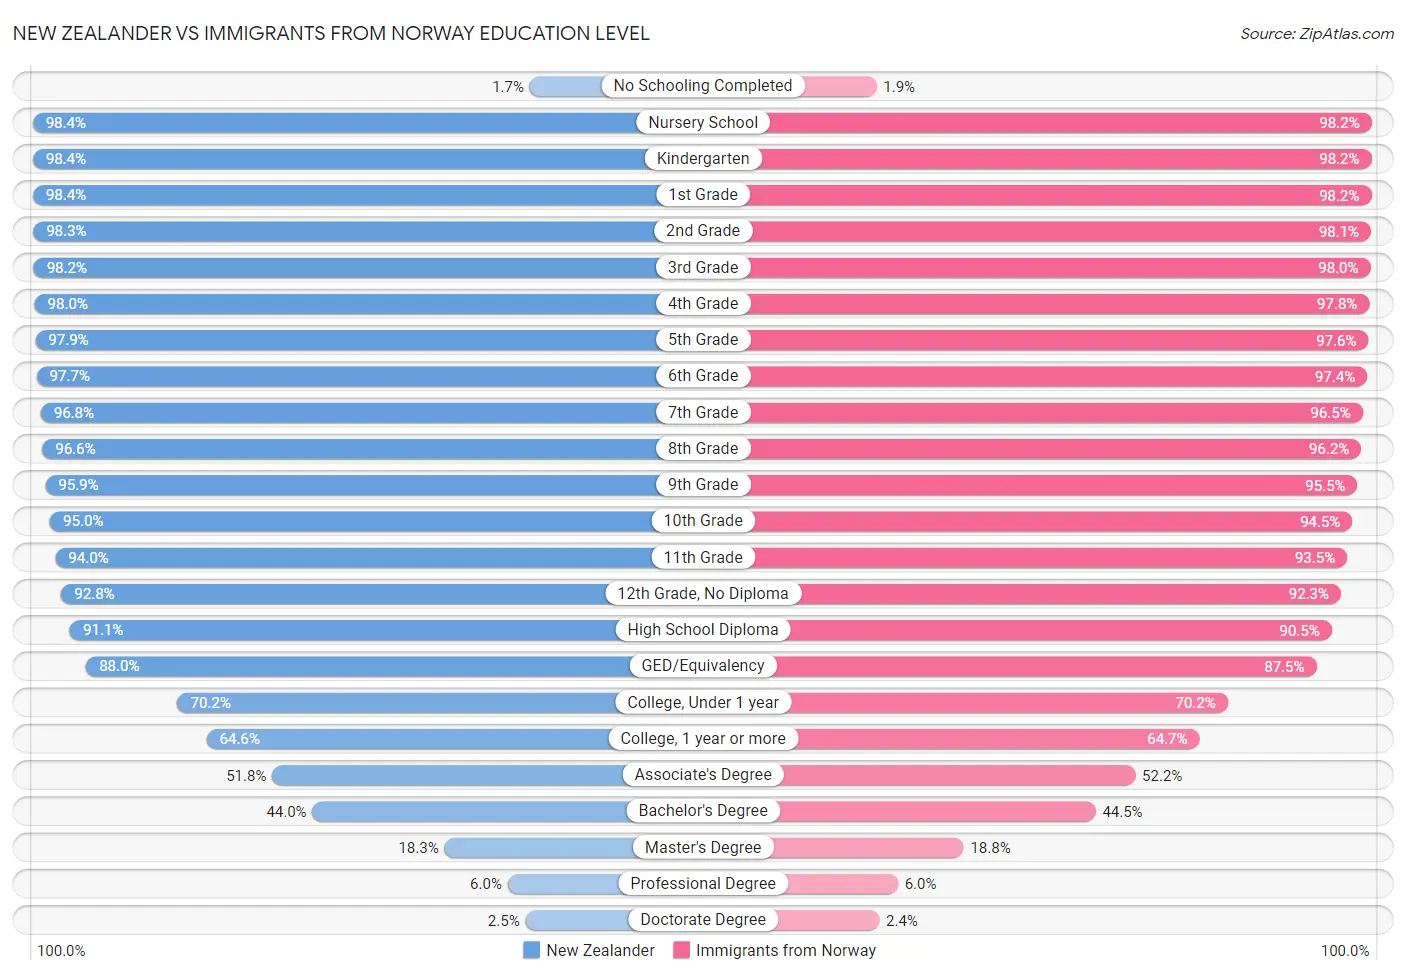 New Zealander vs Immigrants from Norway Education Level